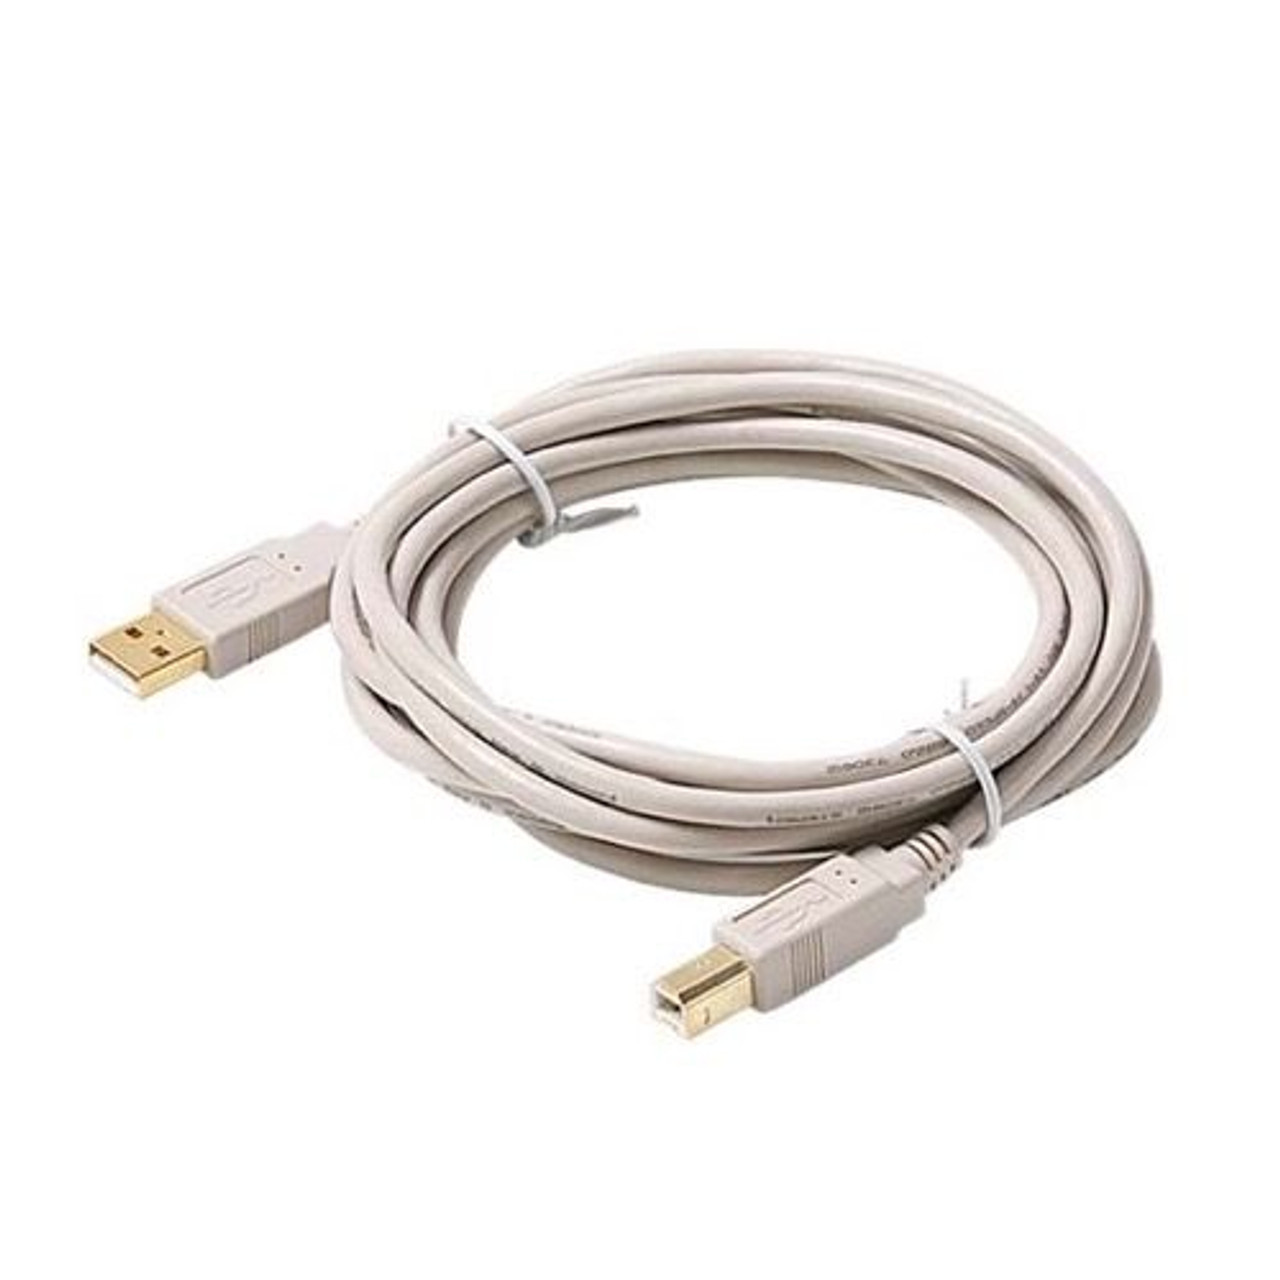 Steren 506-465 15' FT A-B USB Cable 2.0 USB A to B Male to Male Backwards Compatible with USB 1.1, Flexible PVC Jacket with 24K Gold Contacts, UL Listed, Part # 506465